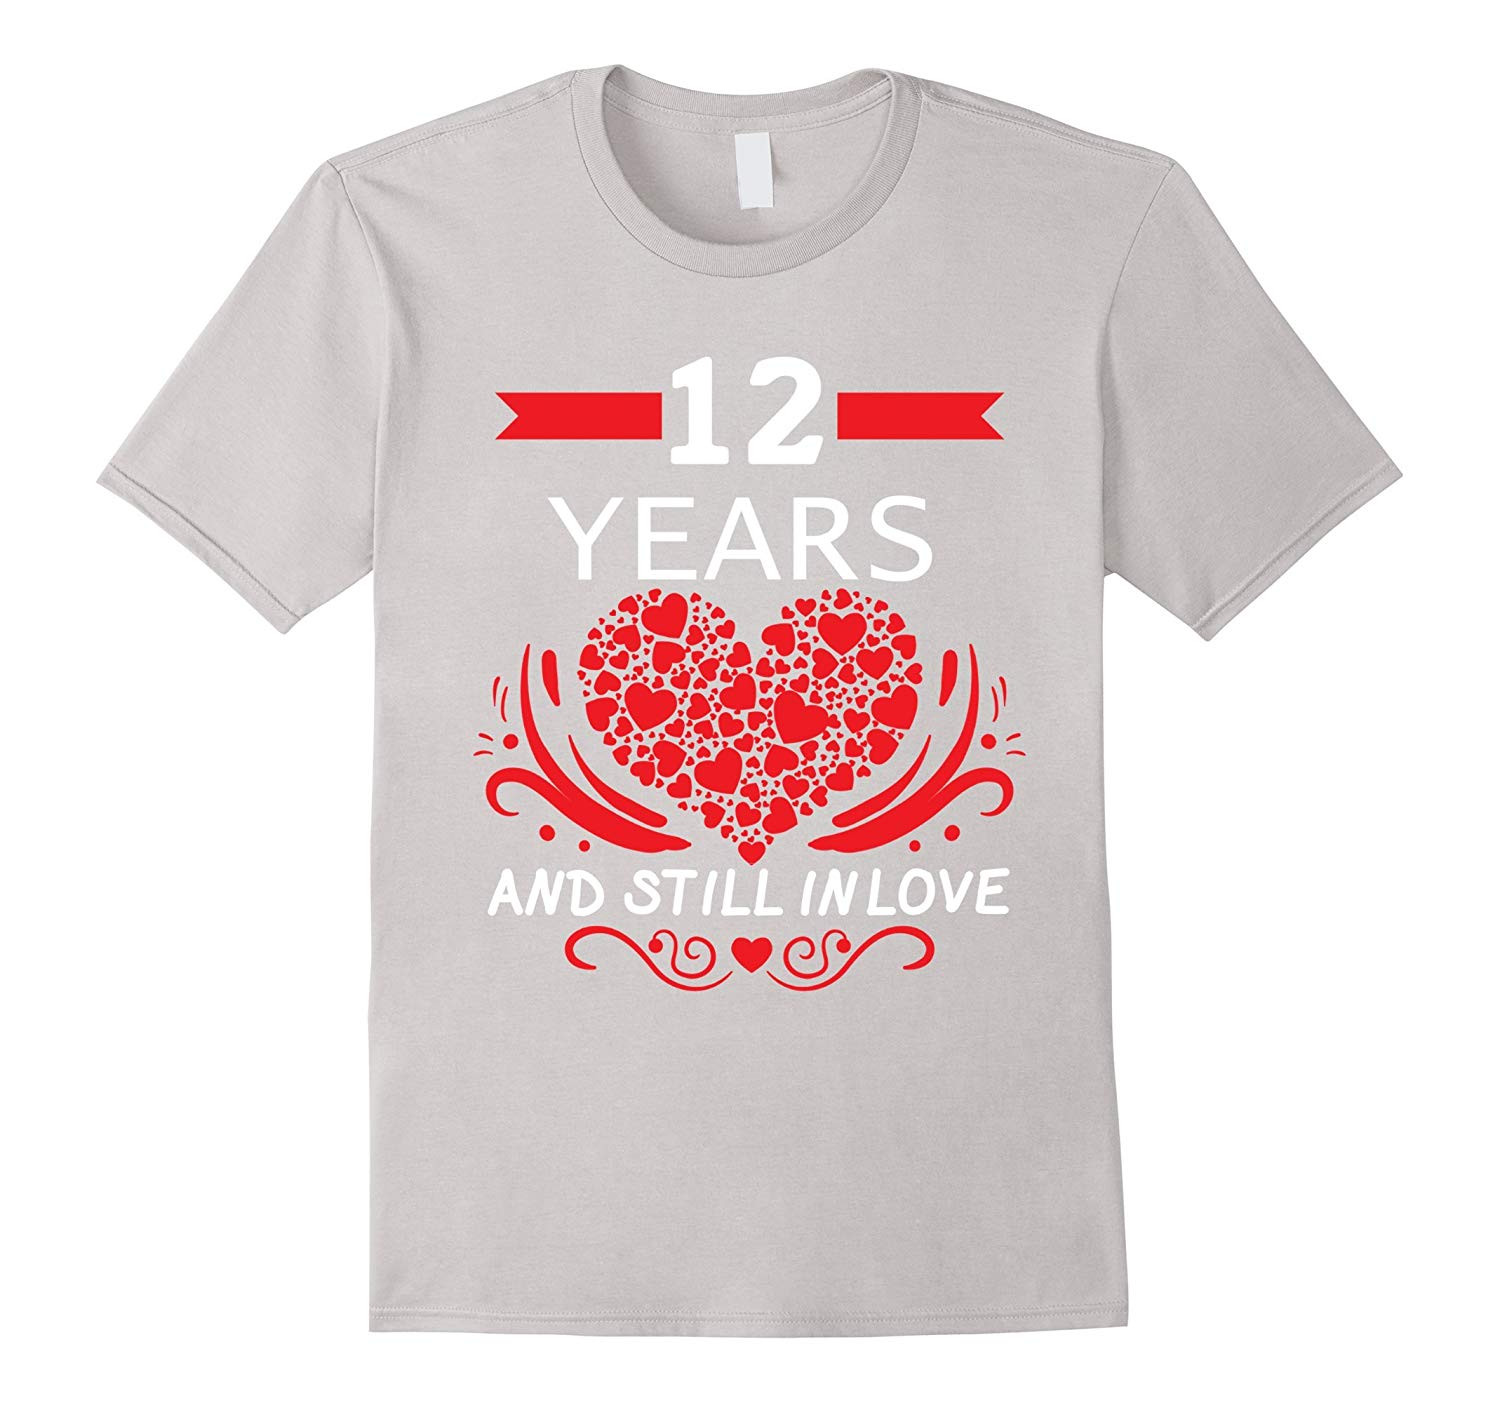 12 Years Anniversary Gift Ideas
 12th Wedding Anniversary Gifts 12 Year Shirt For Him and